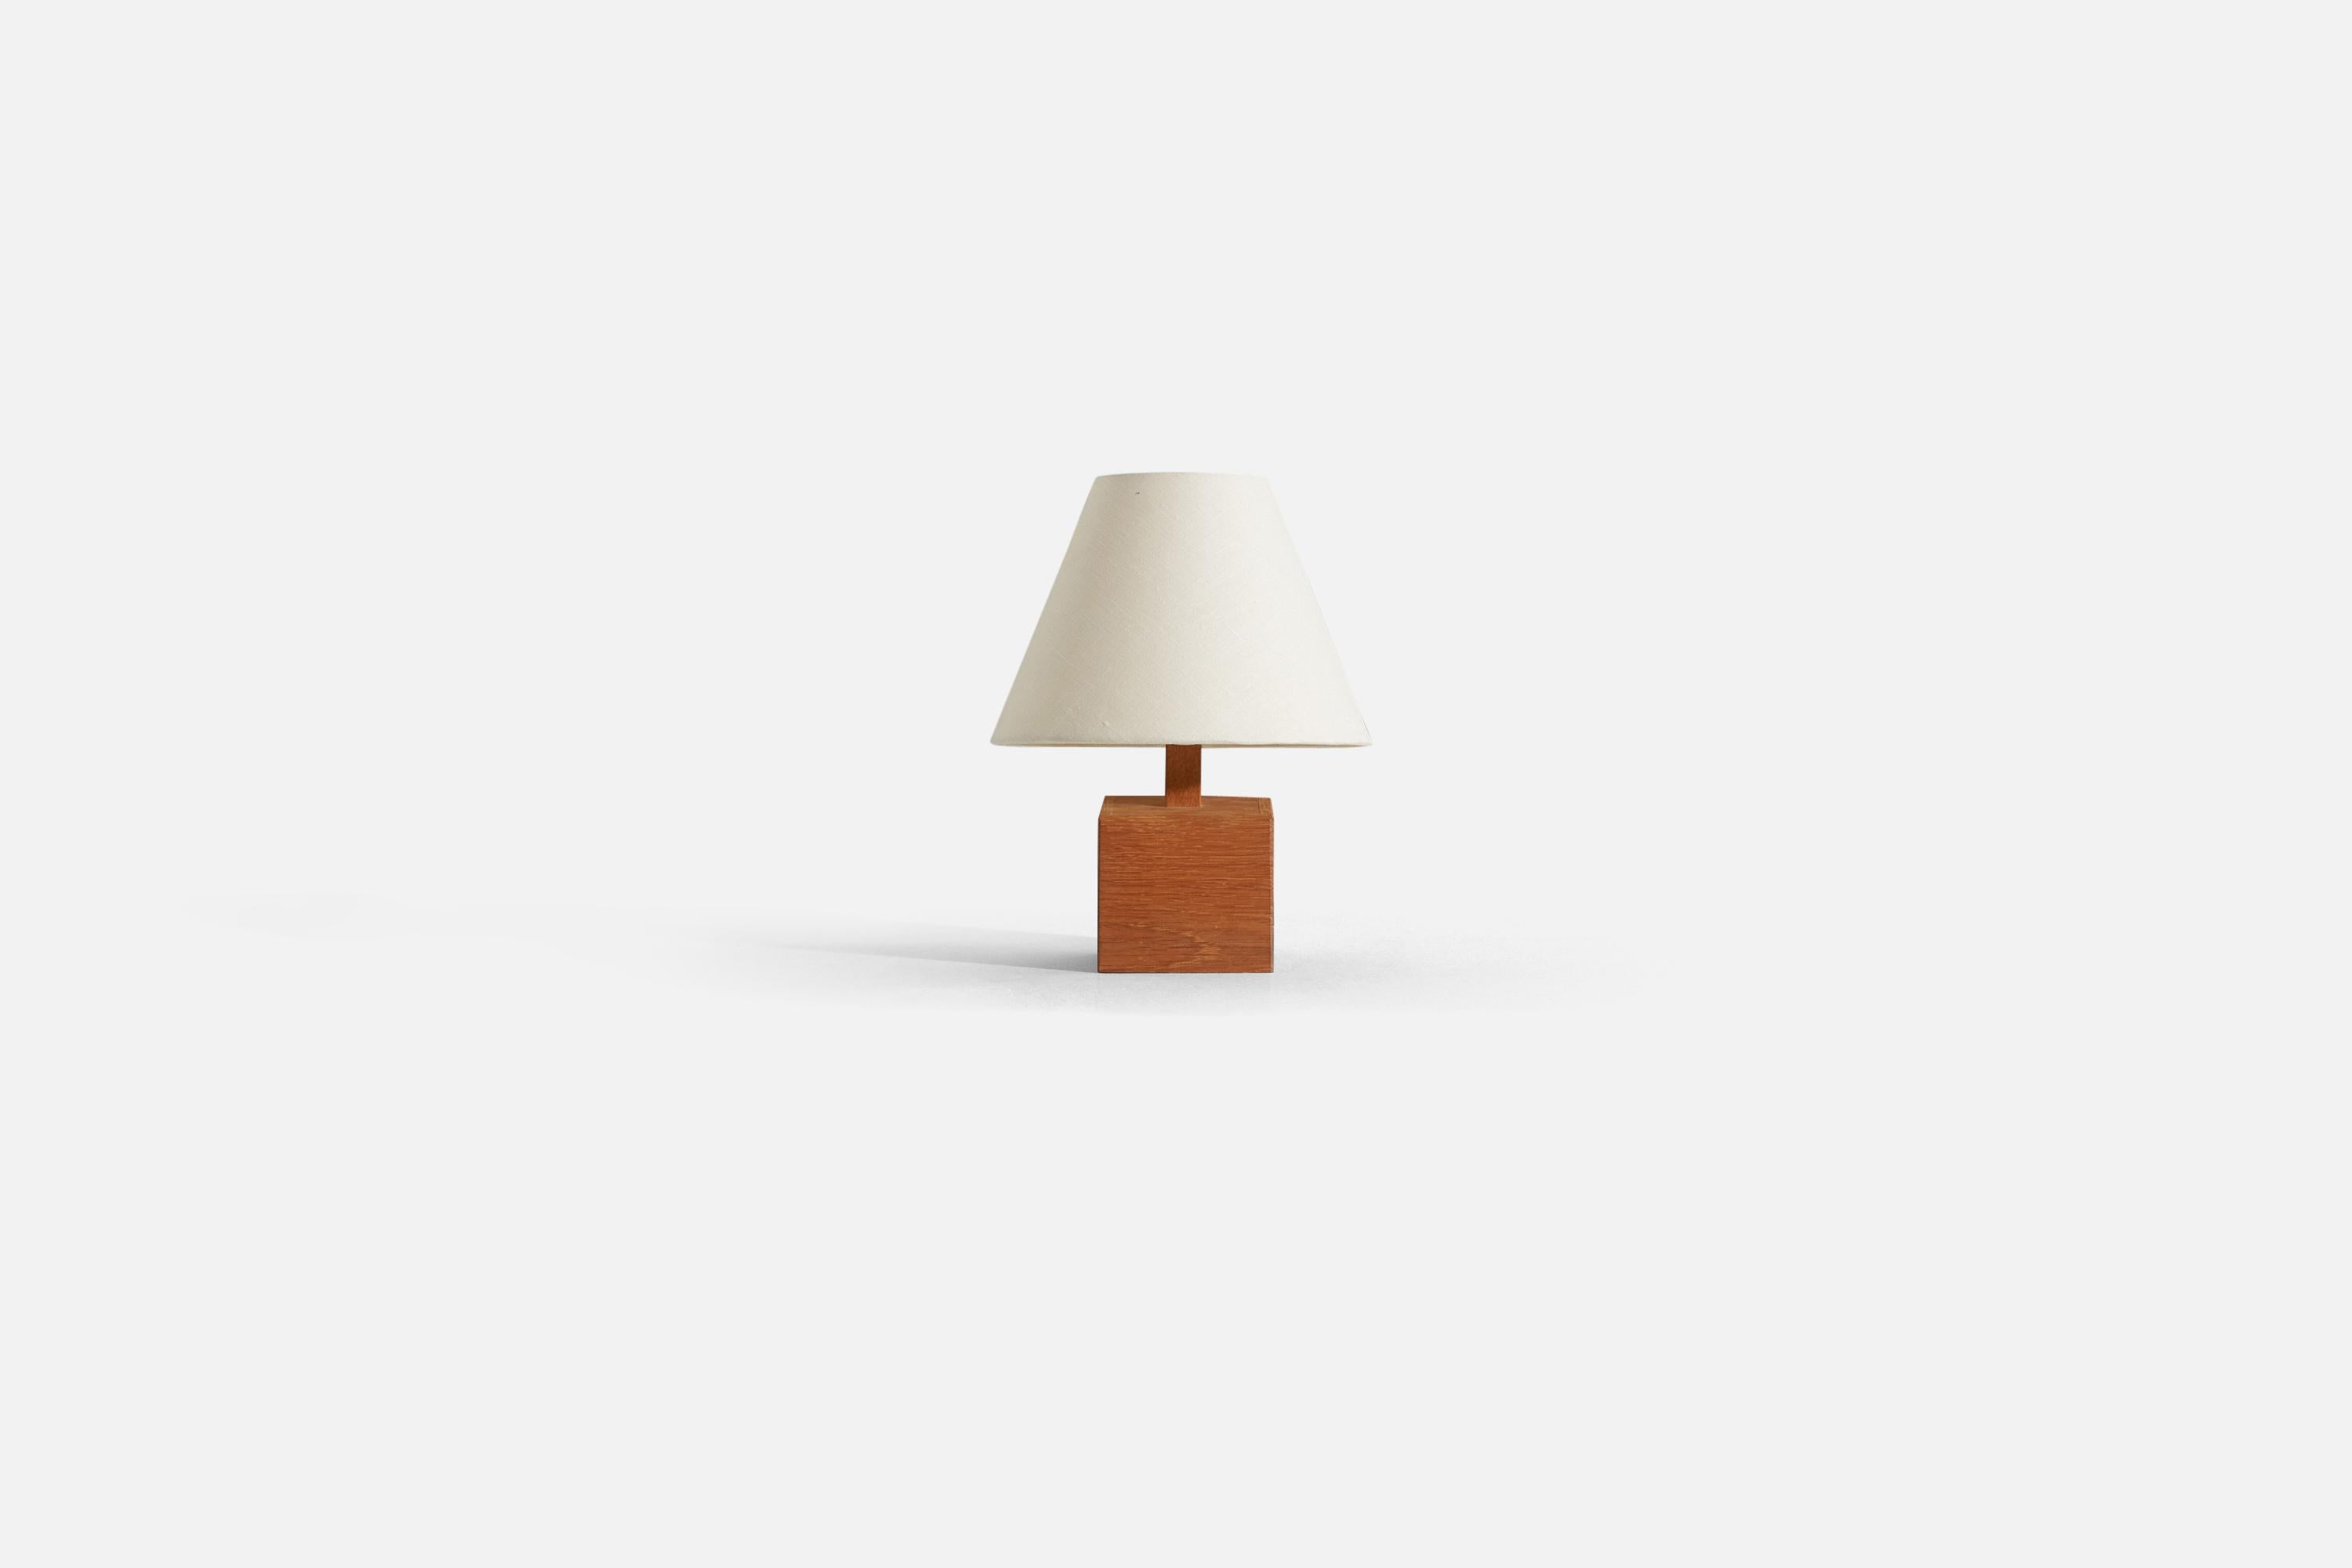 A solid teak cube / square table lamp designed and produced in Sweden, c. 1950s.

Sold without lampshade. Measurements listed are of lamp only. 

For reference
Shade : 4 x 8.25 x 6.25
Lamp with shade : 10.75 x 8.25 x 8.25.